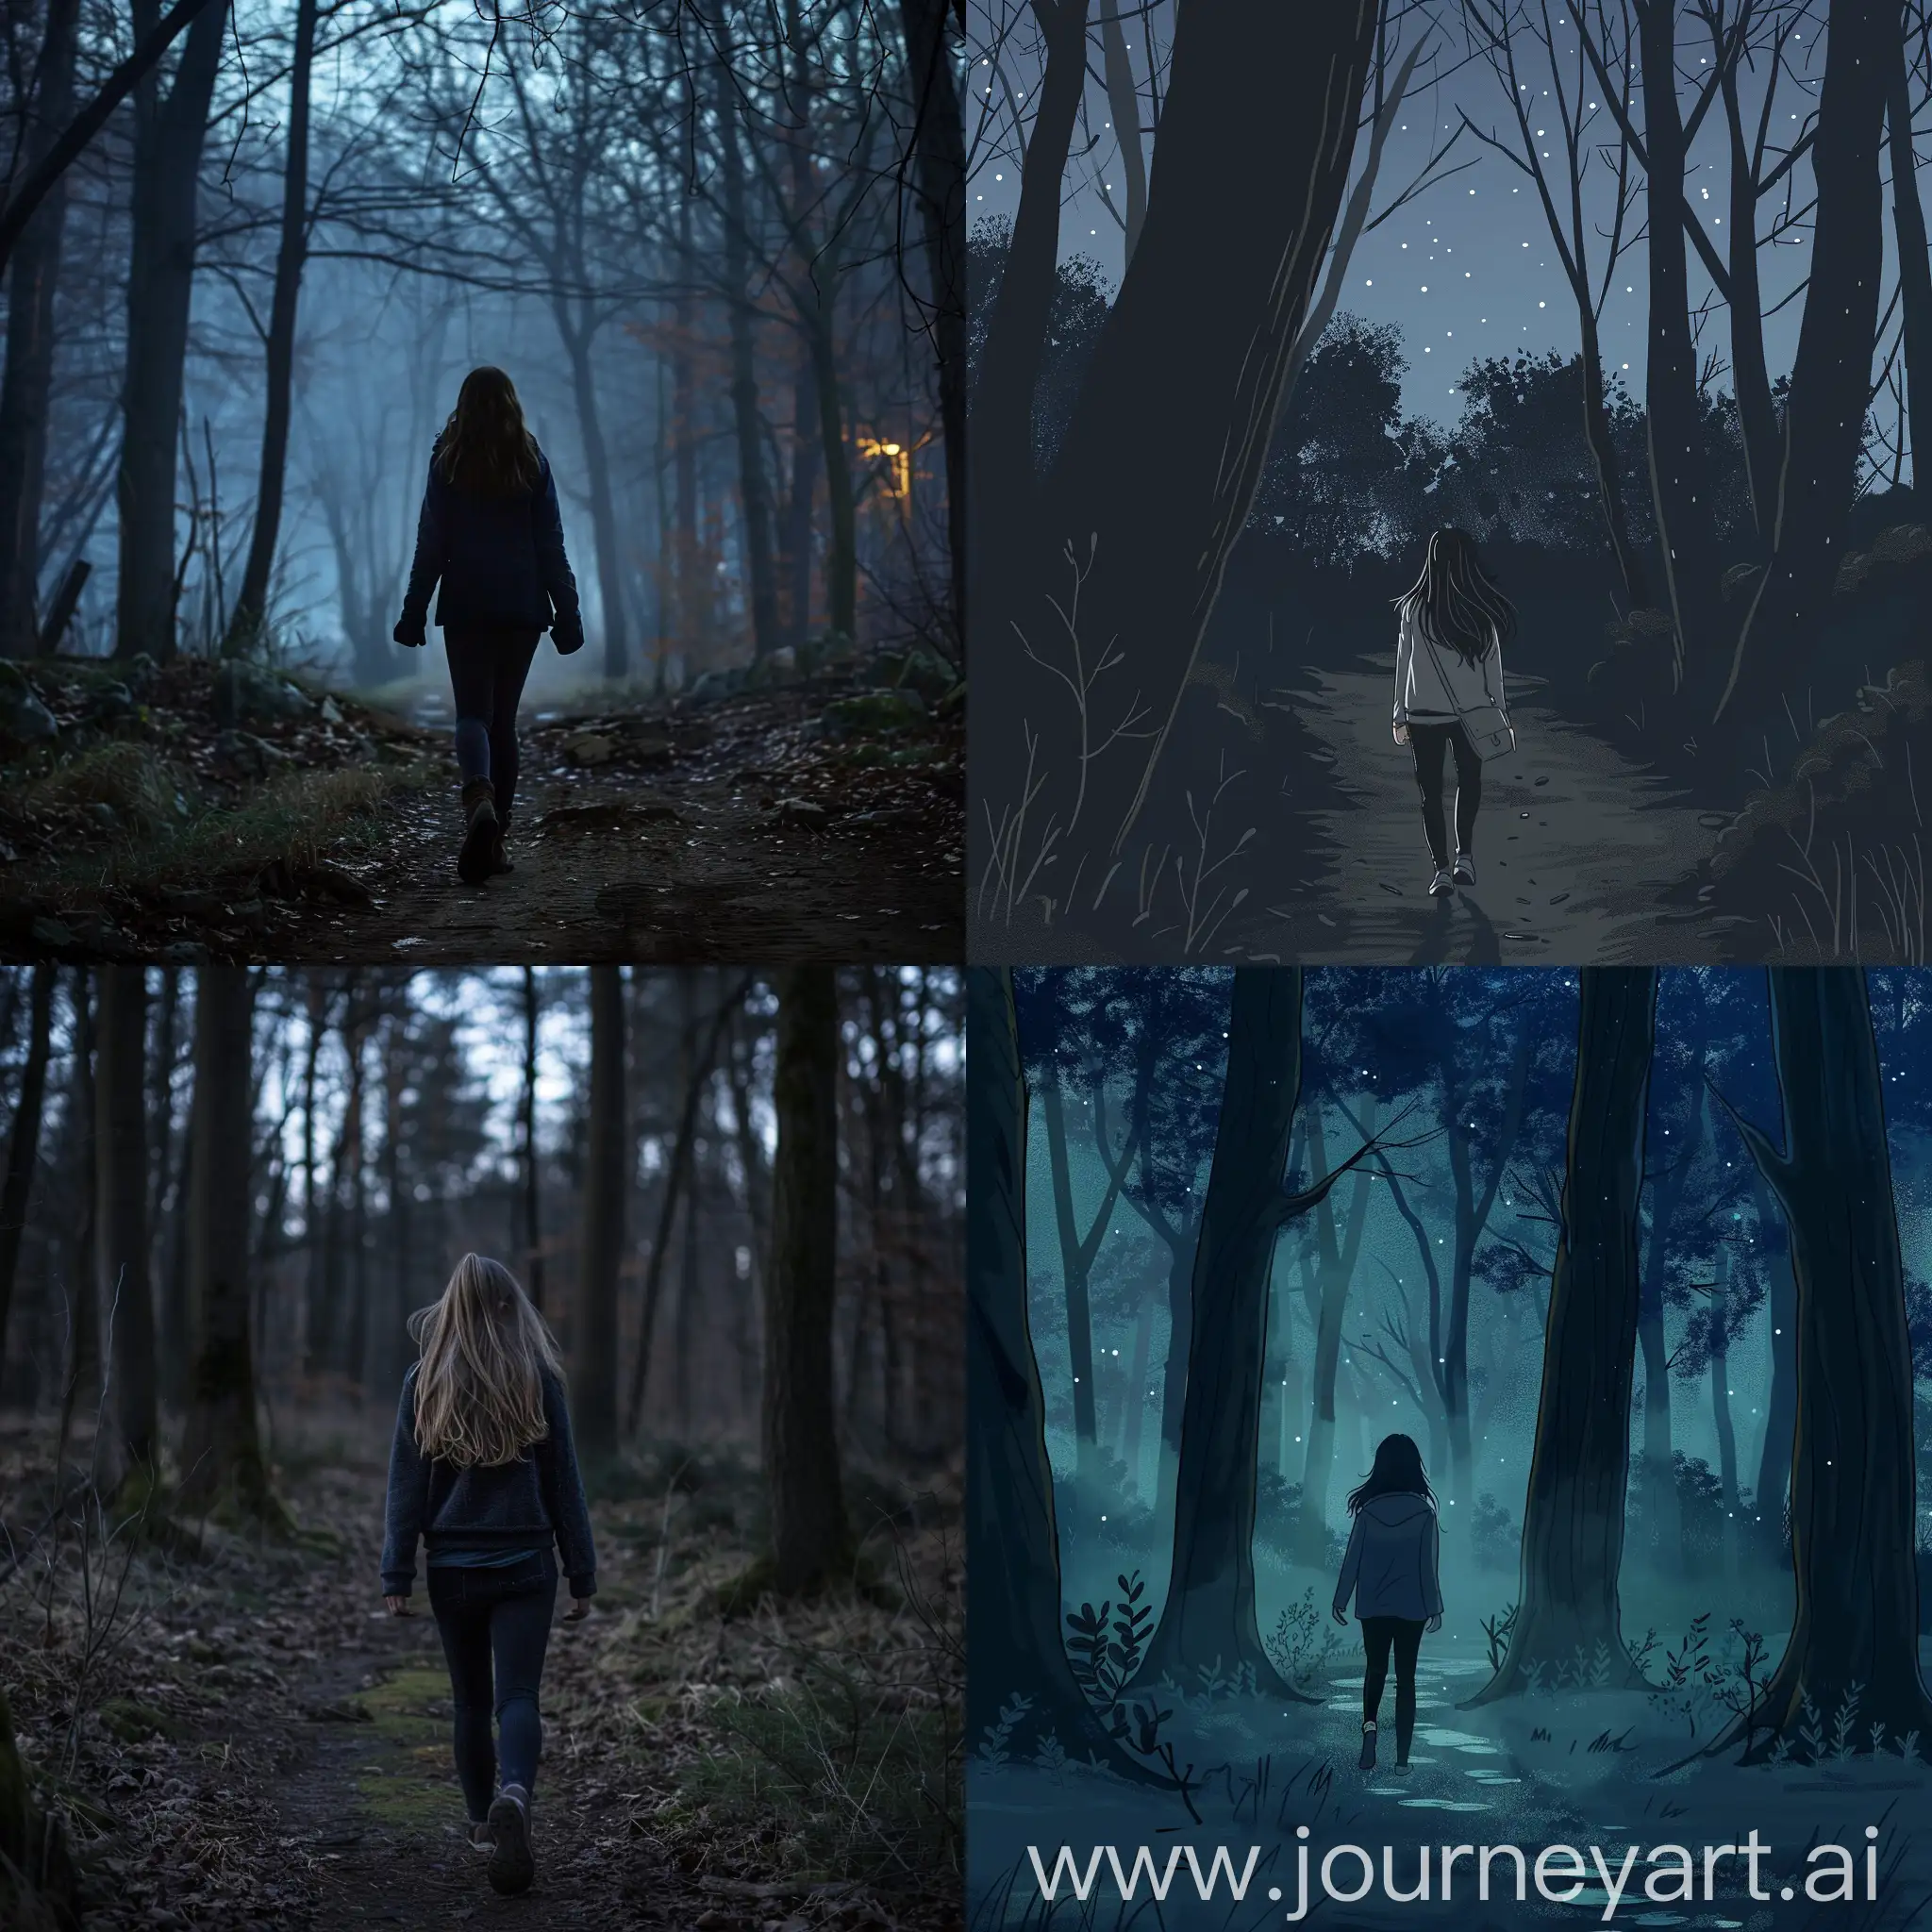 A teenager girl walking in a forest alone at night,